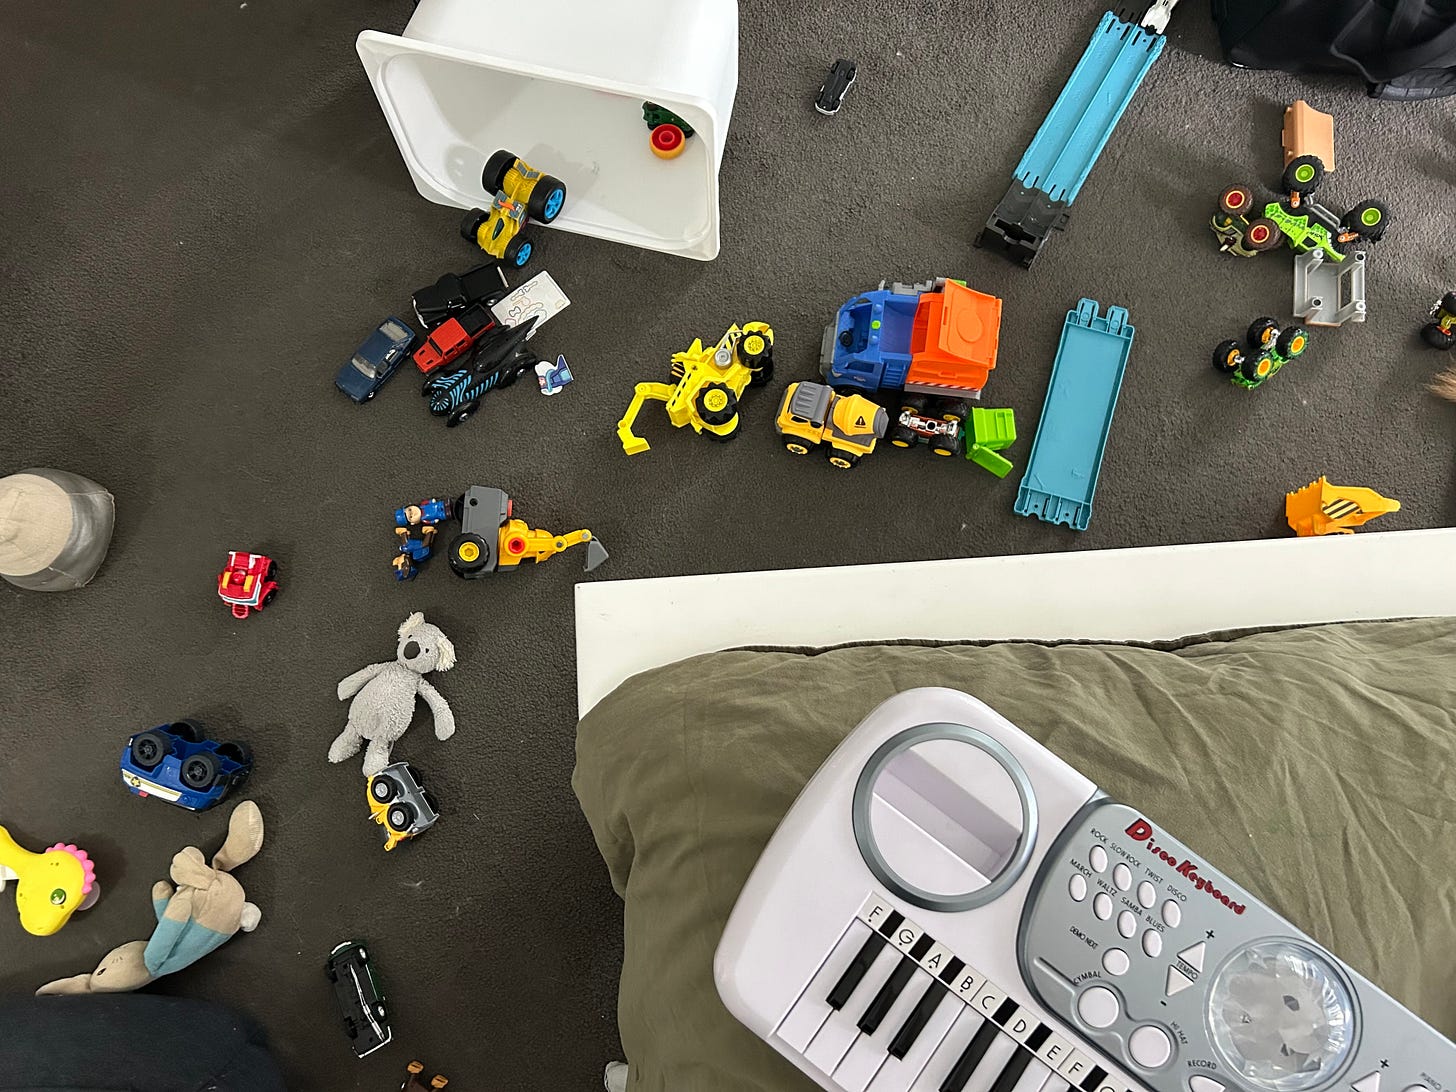 A mess of toy cars, trucks and monster trucks scattered on the floor with a disco keyboard partially shown on the edge of a bed.